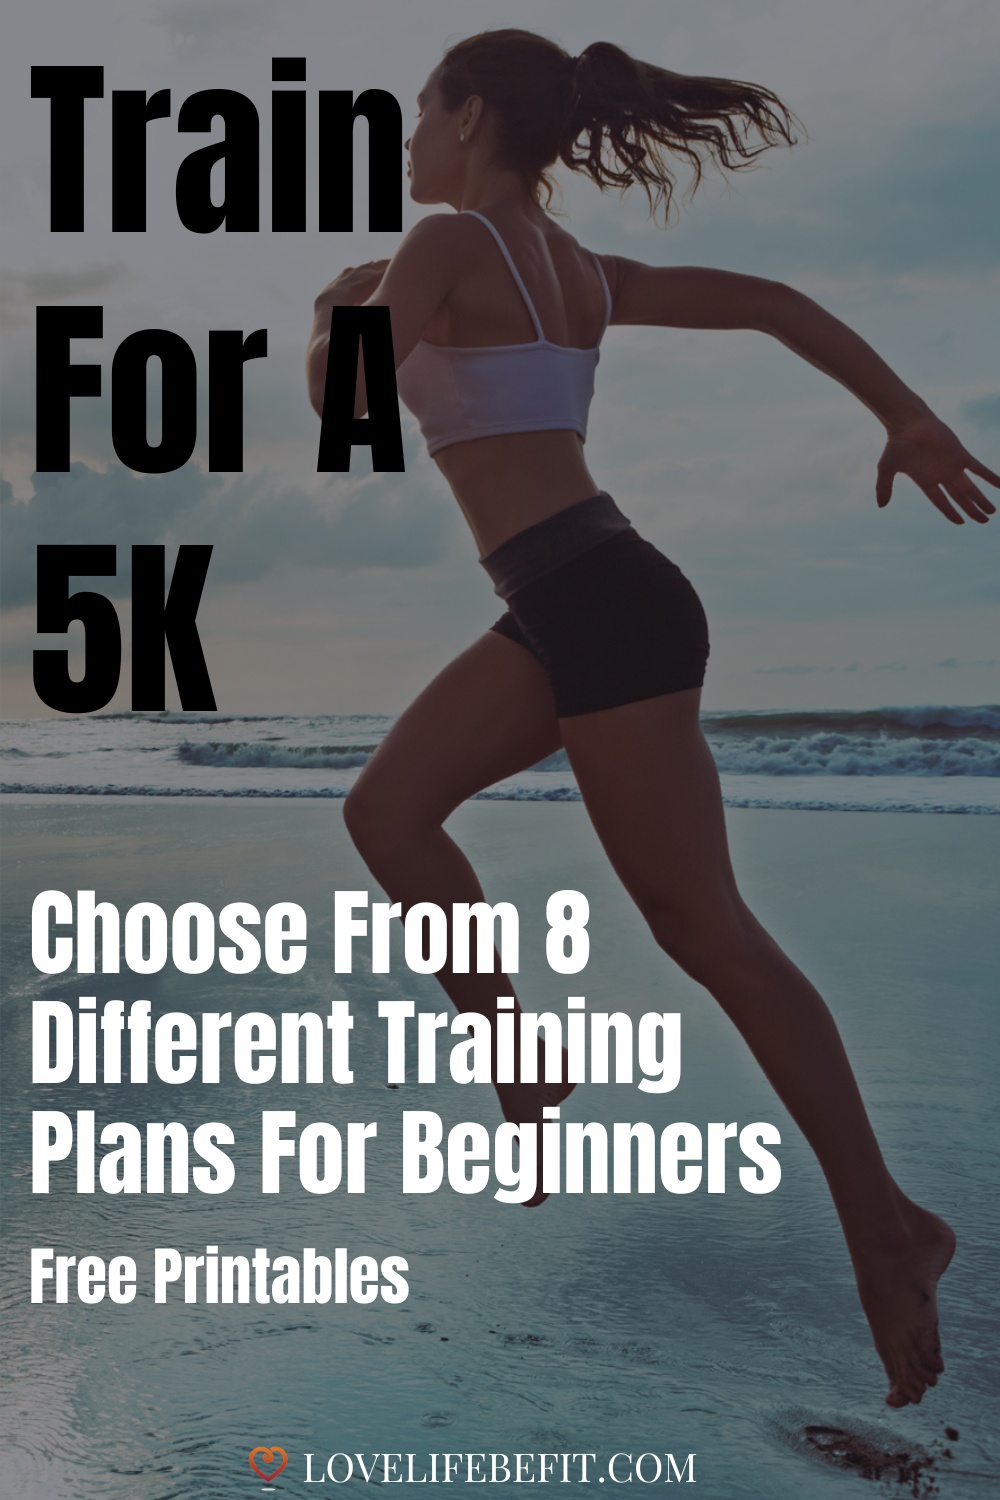 Train for a 5K